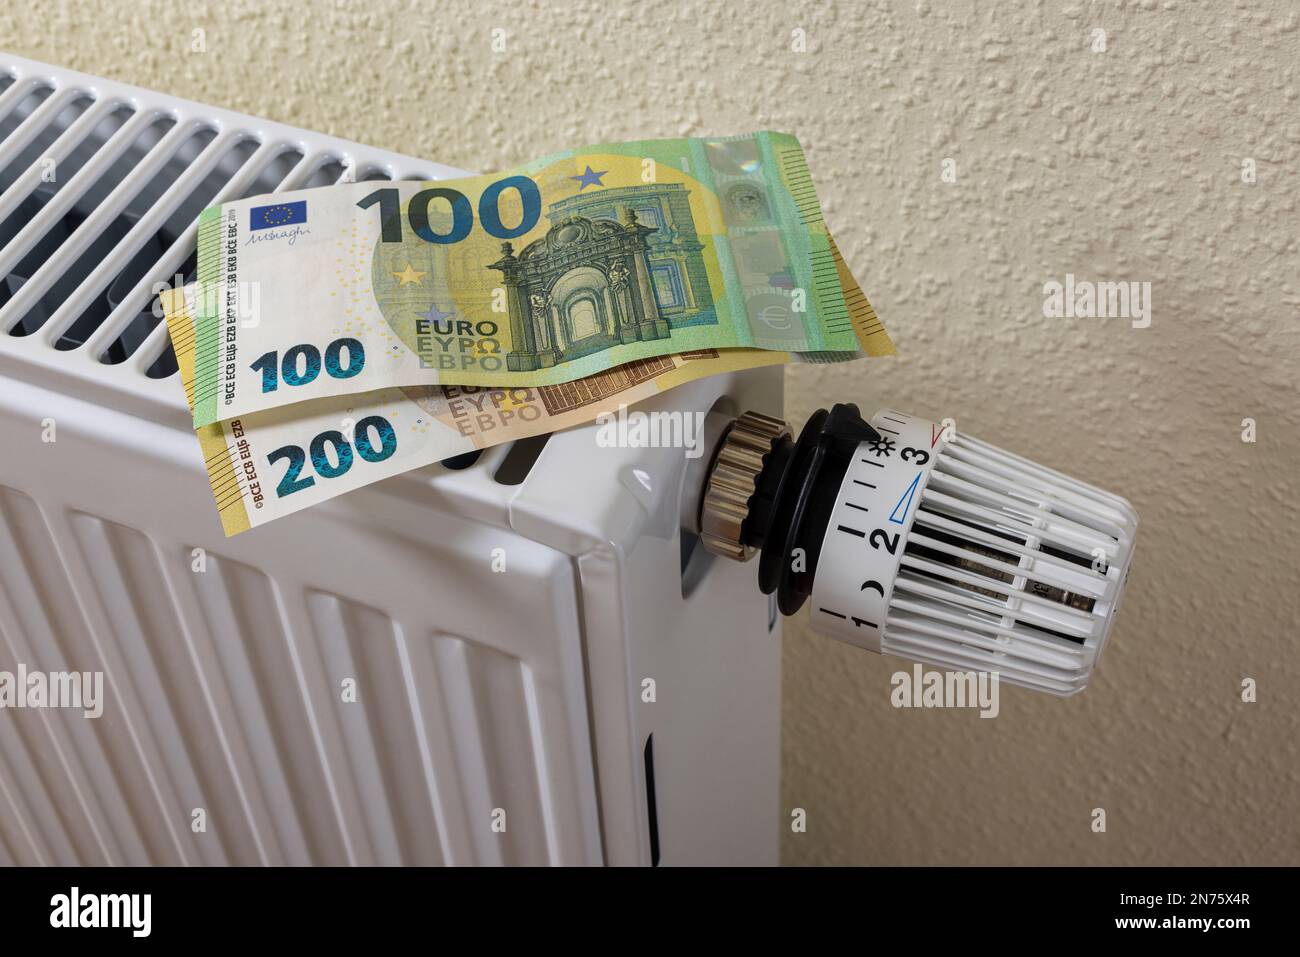 300 euros, various banknotes, radiator thermostat setting level 3 approx. 2ö°C., symbol image, energy flat rate, energy costs, rising heating costs, Stock Photo